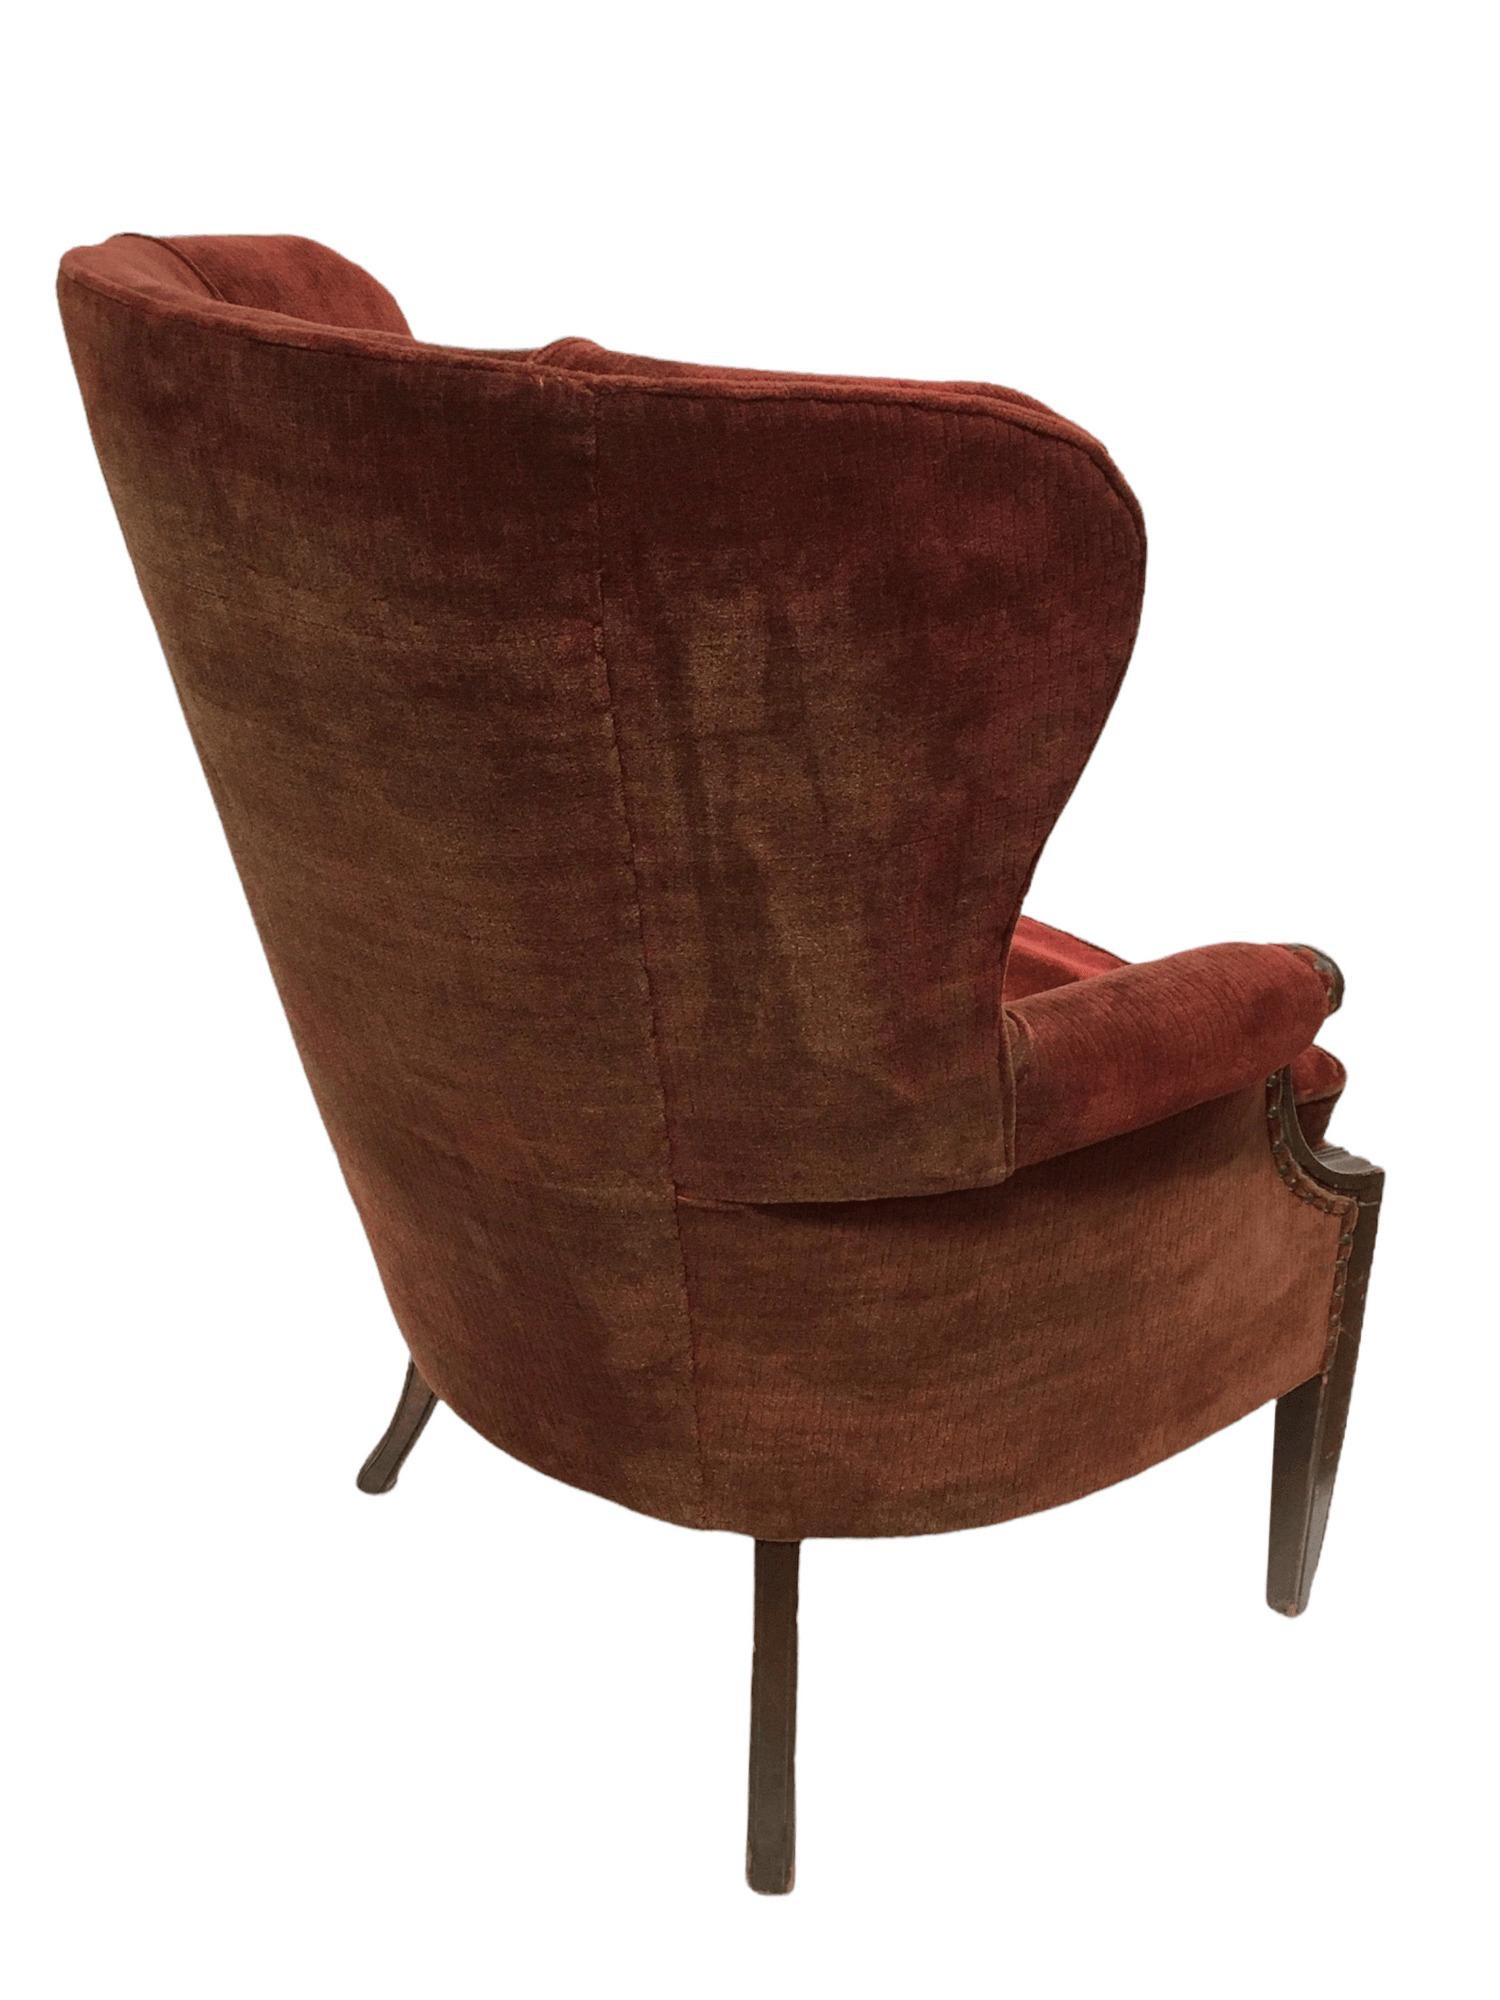 Art Deco Vintage Red Velvet Wingback Chair W/ Tufted Seats, C 1920